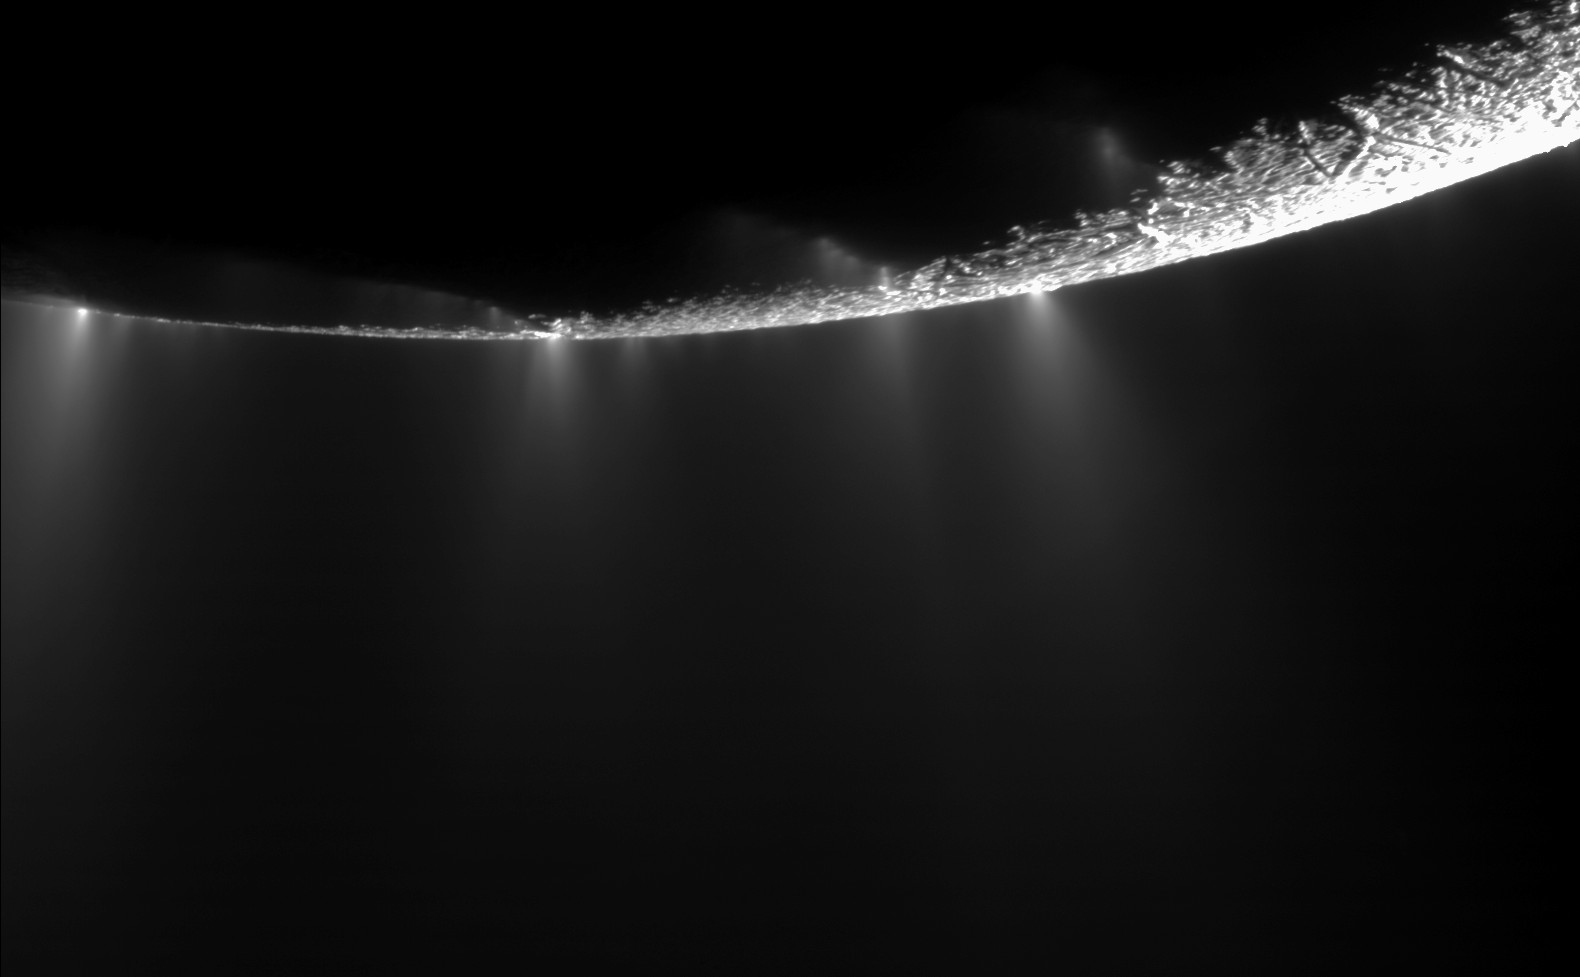 One of the most well-known and beautiful images of Enceladus, showing the geysers erupting from the fractures at the south pole. mage Credit: NASA/JPL-Caltech